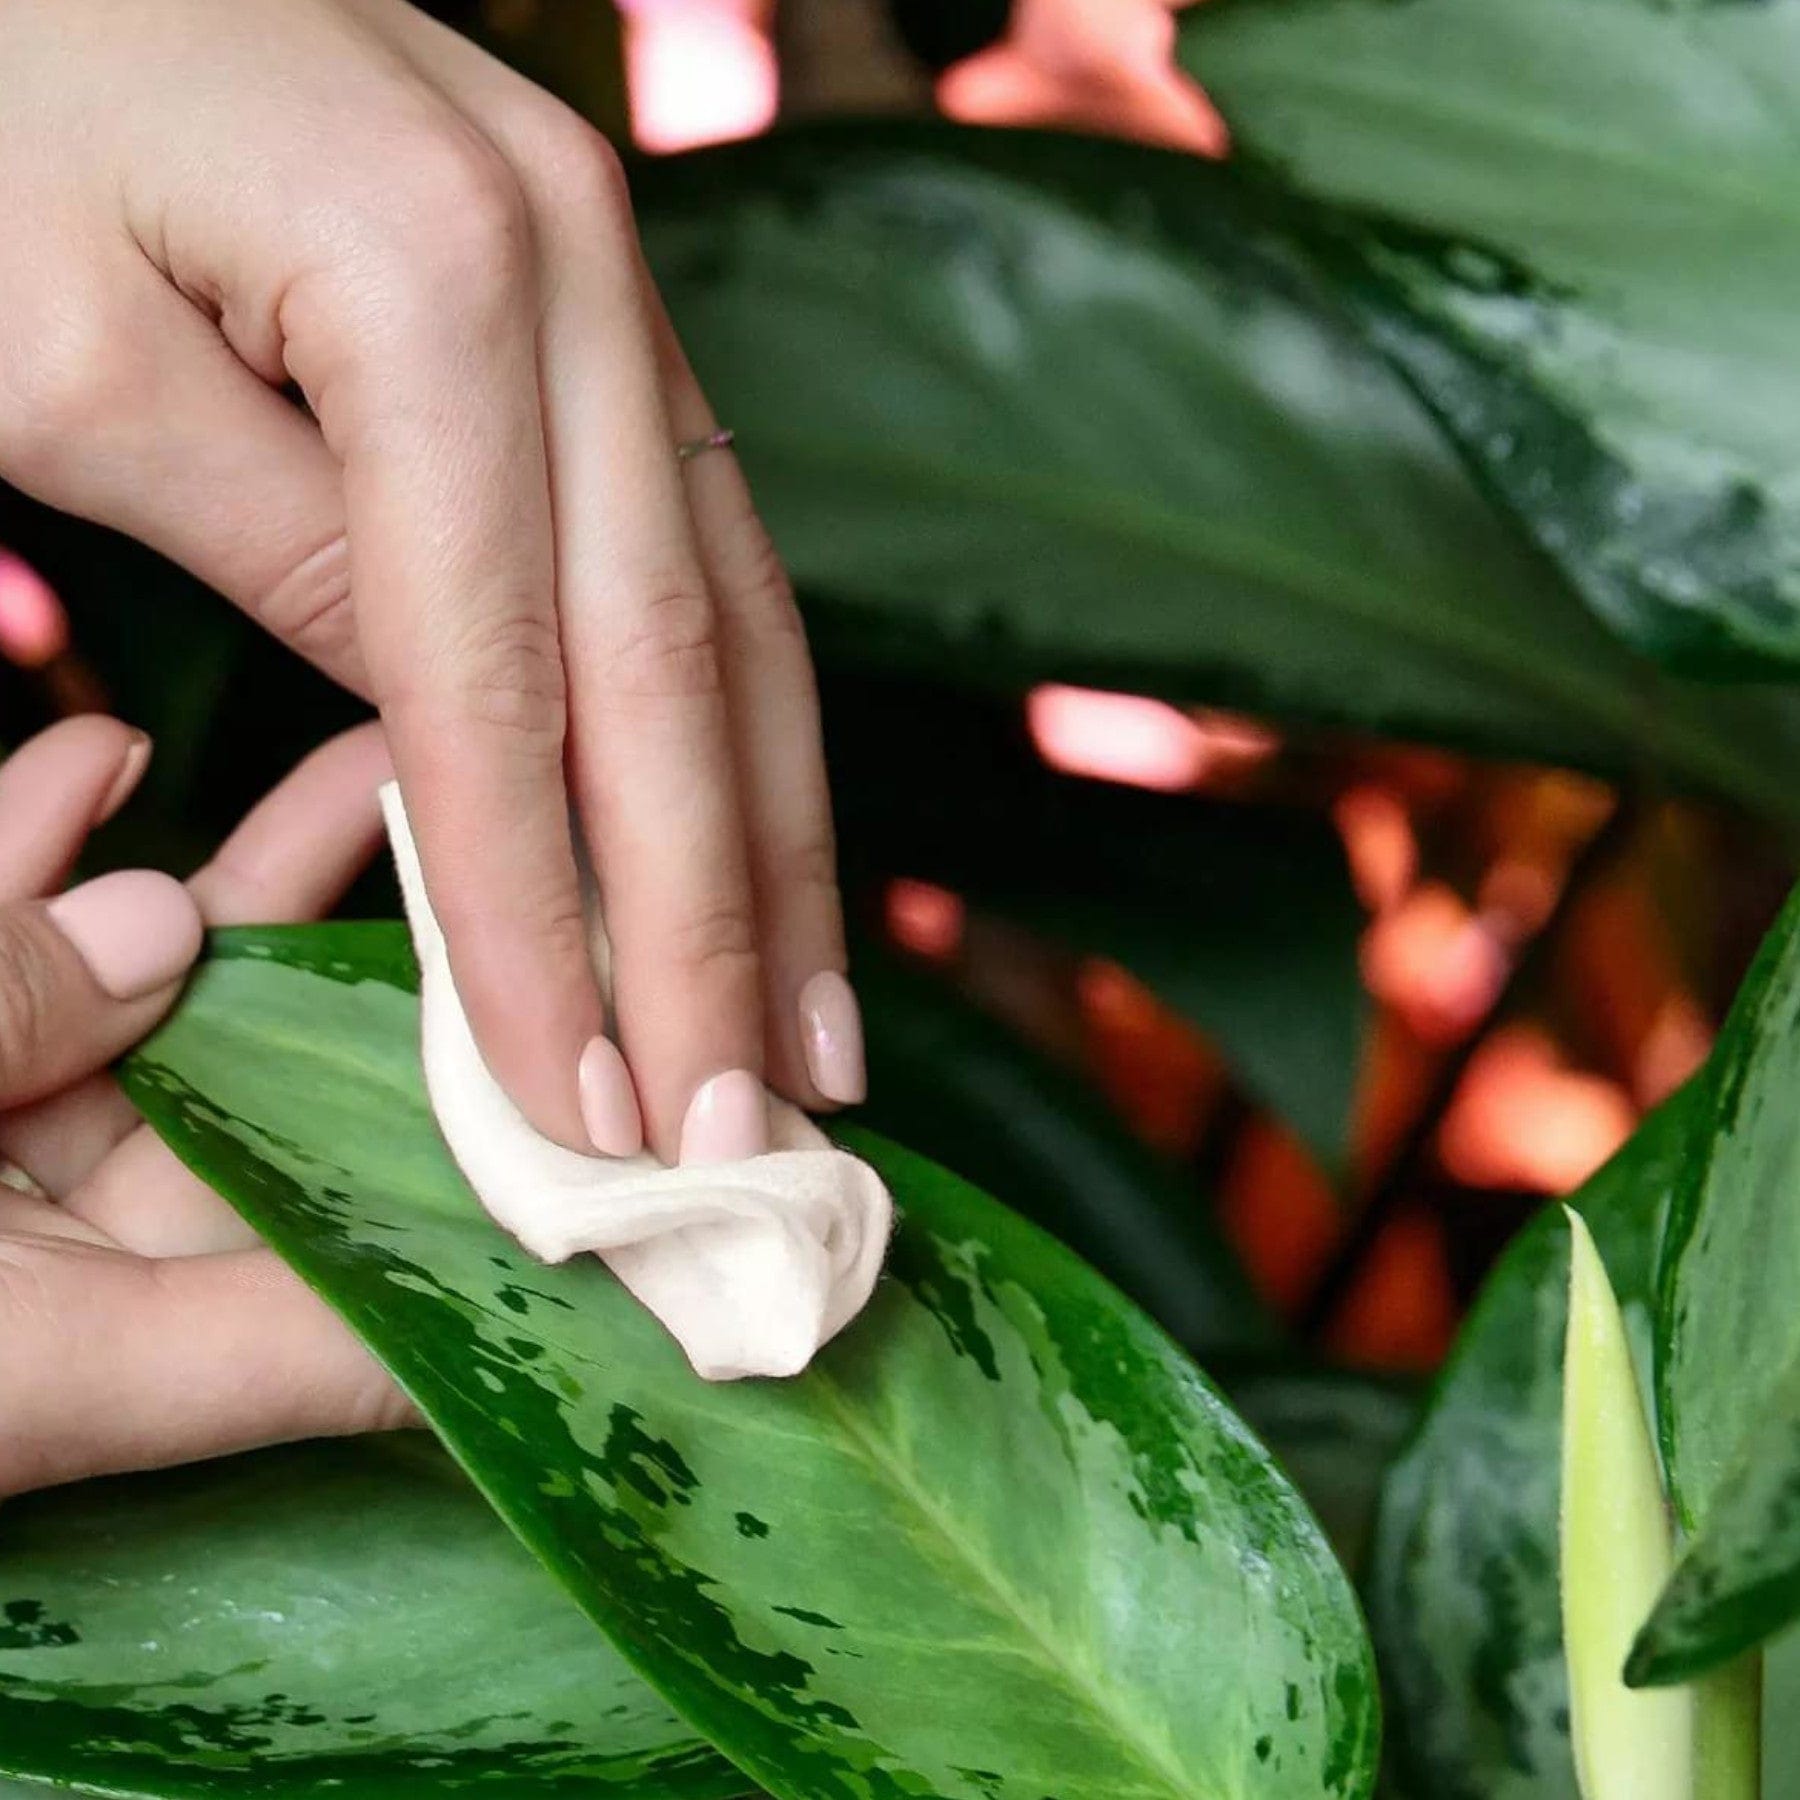 Close-up of a person's hand with manicured nails gently touching a green leaf, symbolizing skin care or interaction with nature, with soft-focus background of foliage and warm light.